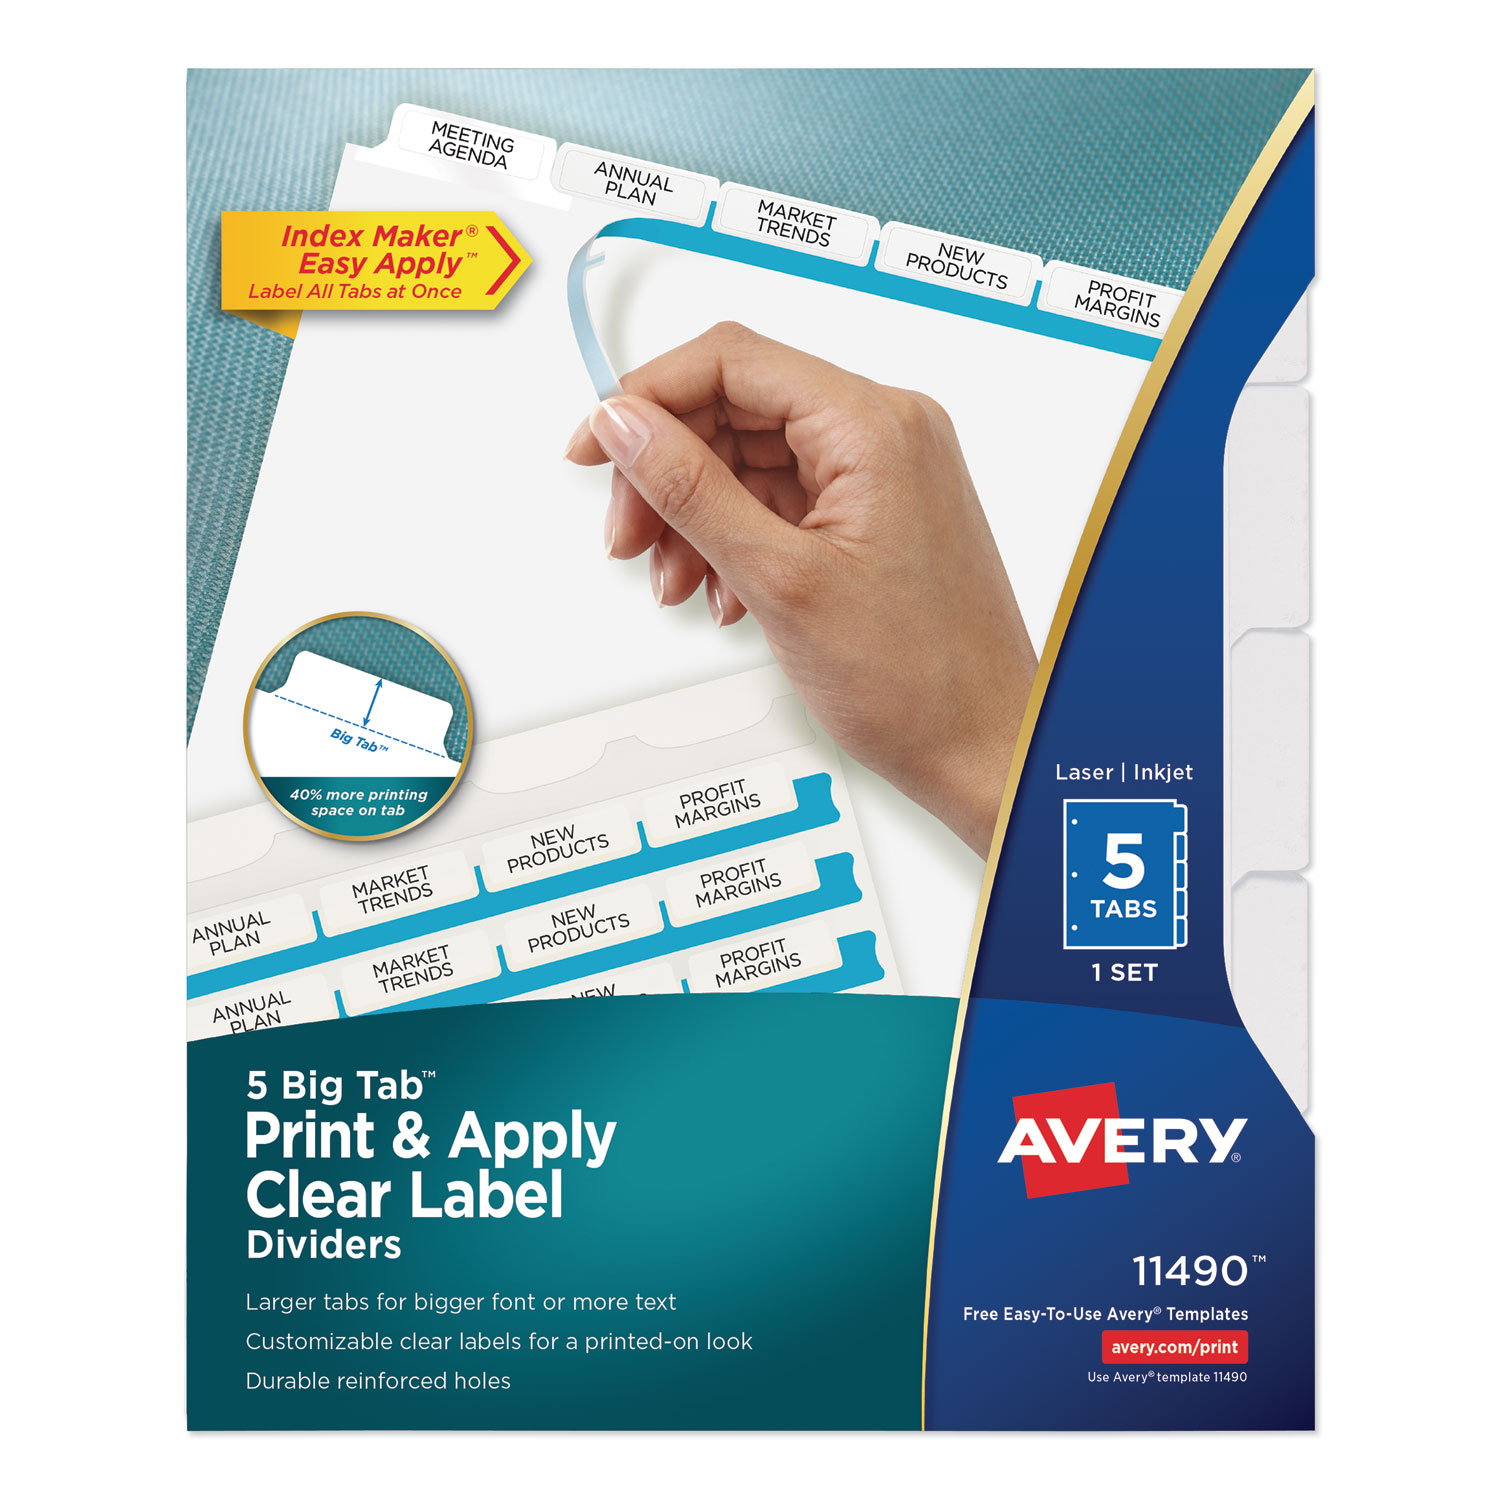  Avery 11490 Print and Apply Index Maker Clear Label Dividers, 5 White Tabs, Letter (AVE11490) 